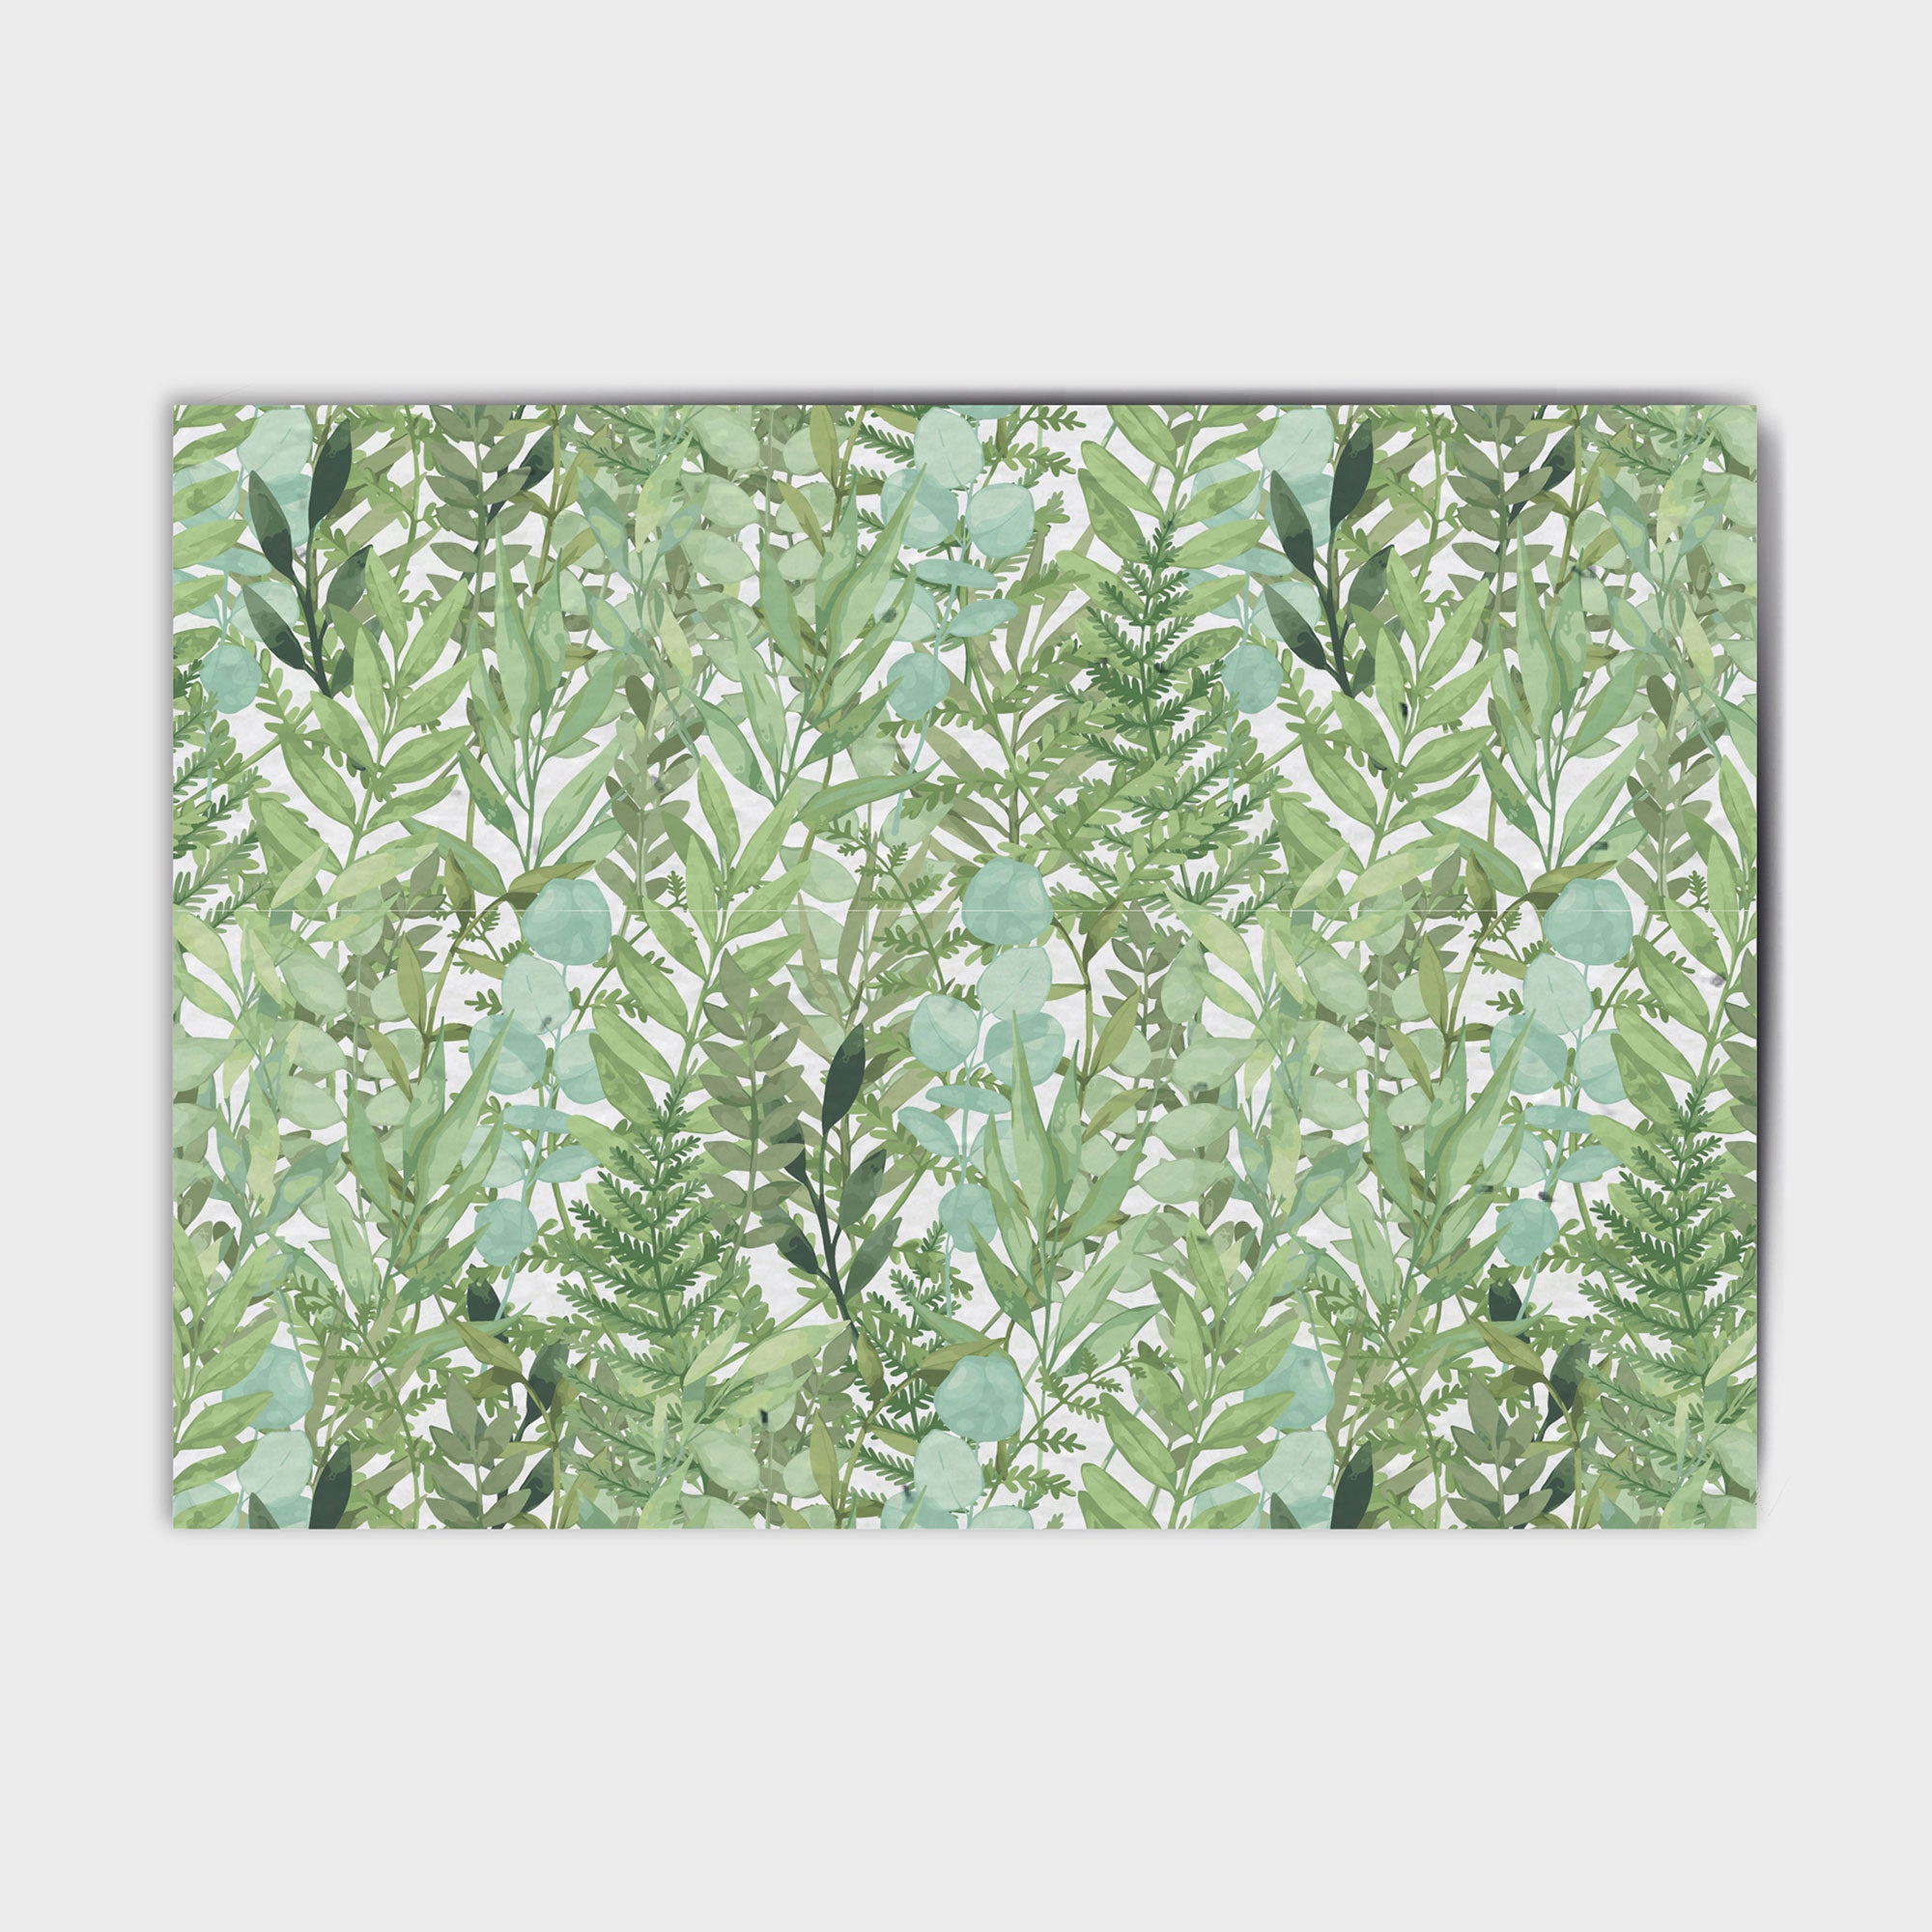 Shop online Forest Ferns - 100% biodegradable seed-embedded cards Shop -The Seed Card Company